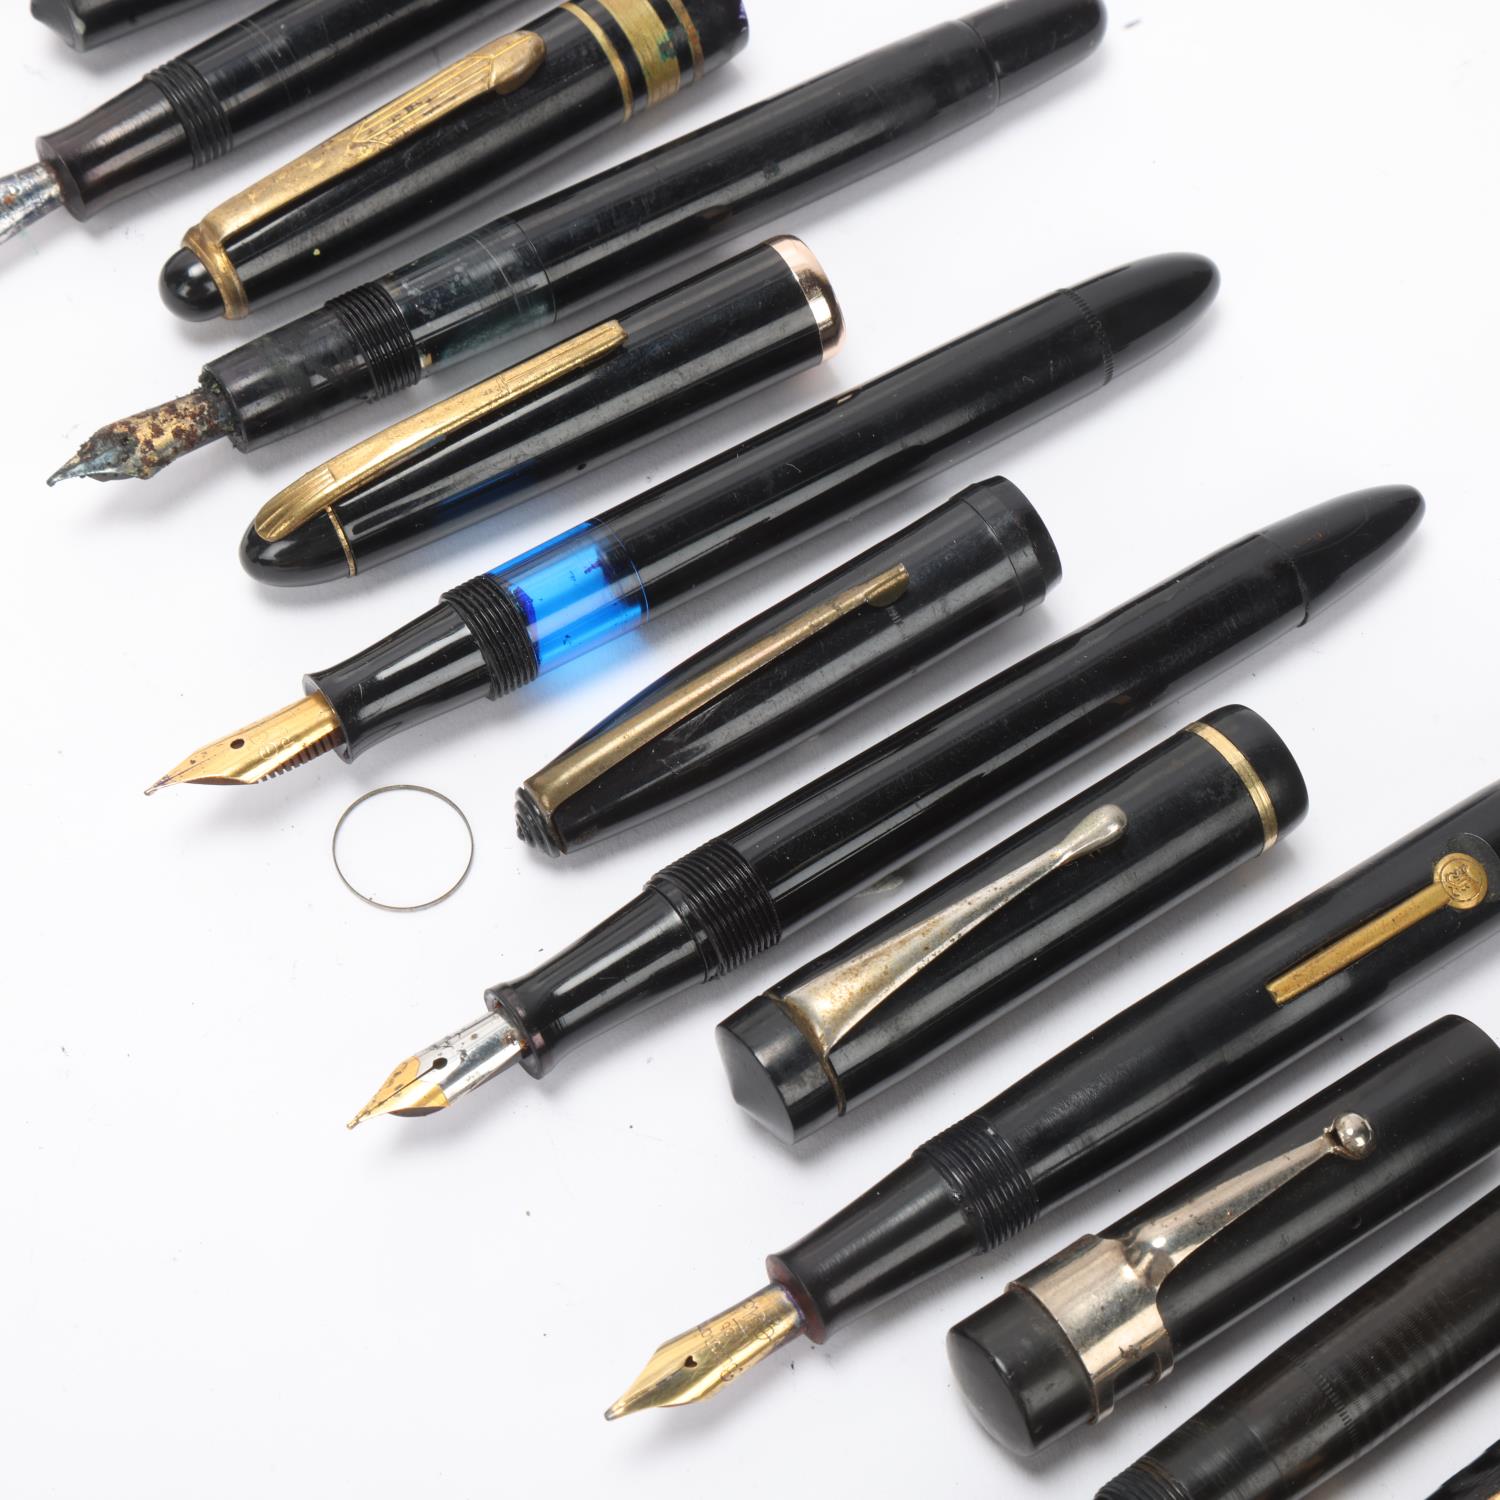 12 vintage fountain pens, including pens by Blackbird, Senator, Burnham, many with 14ct gold nibs - Image 3 of 4